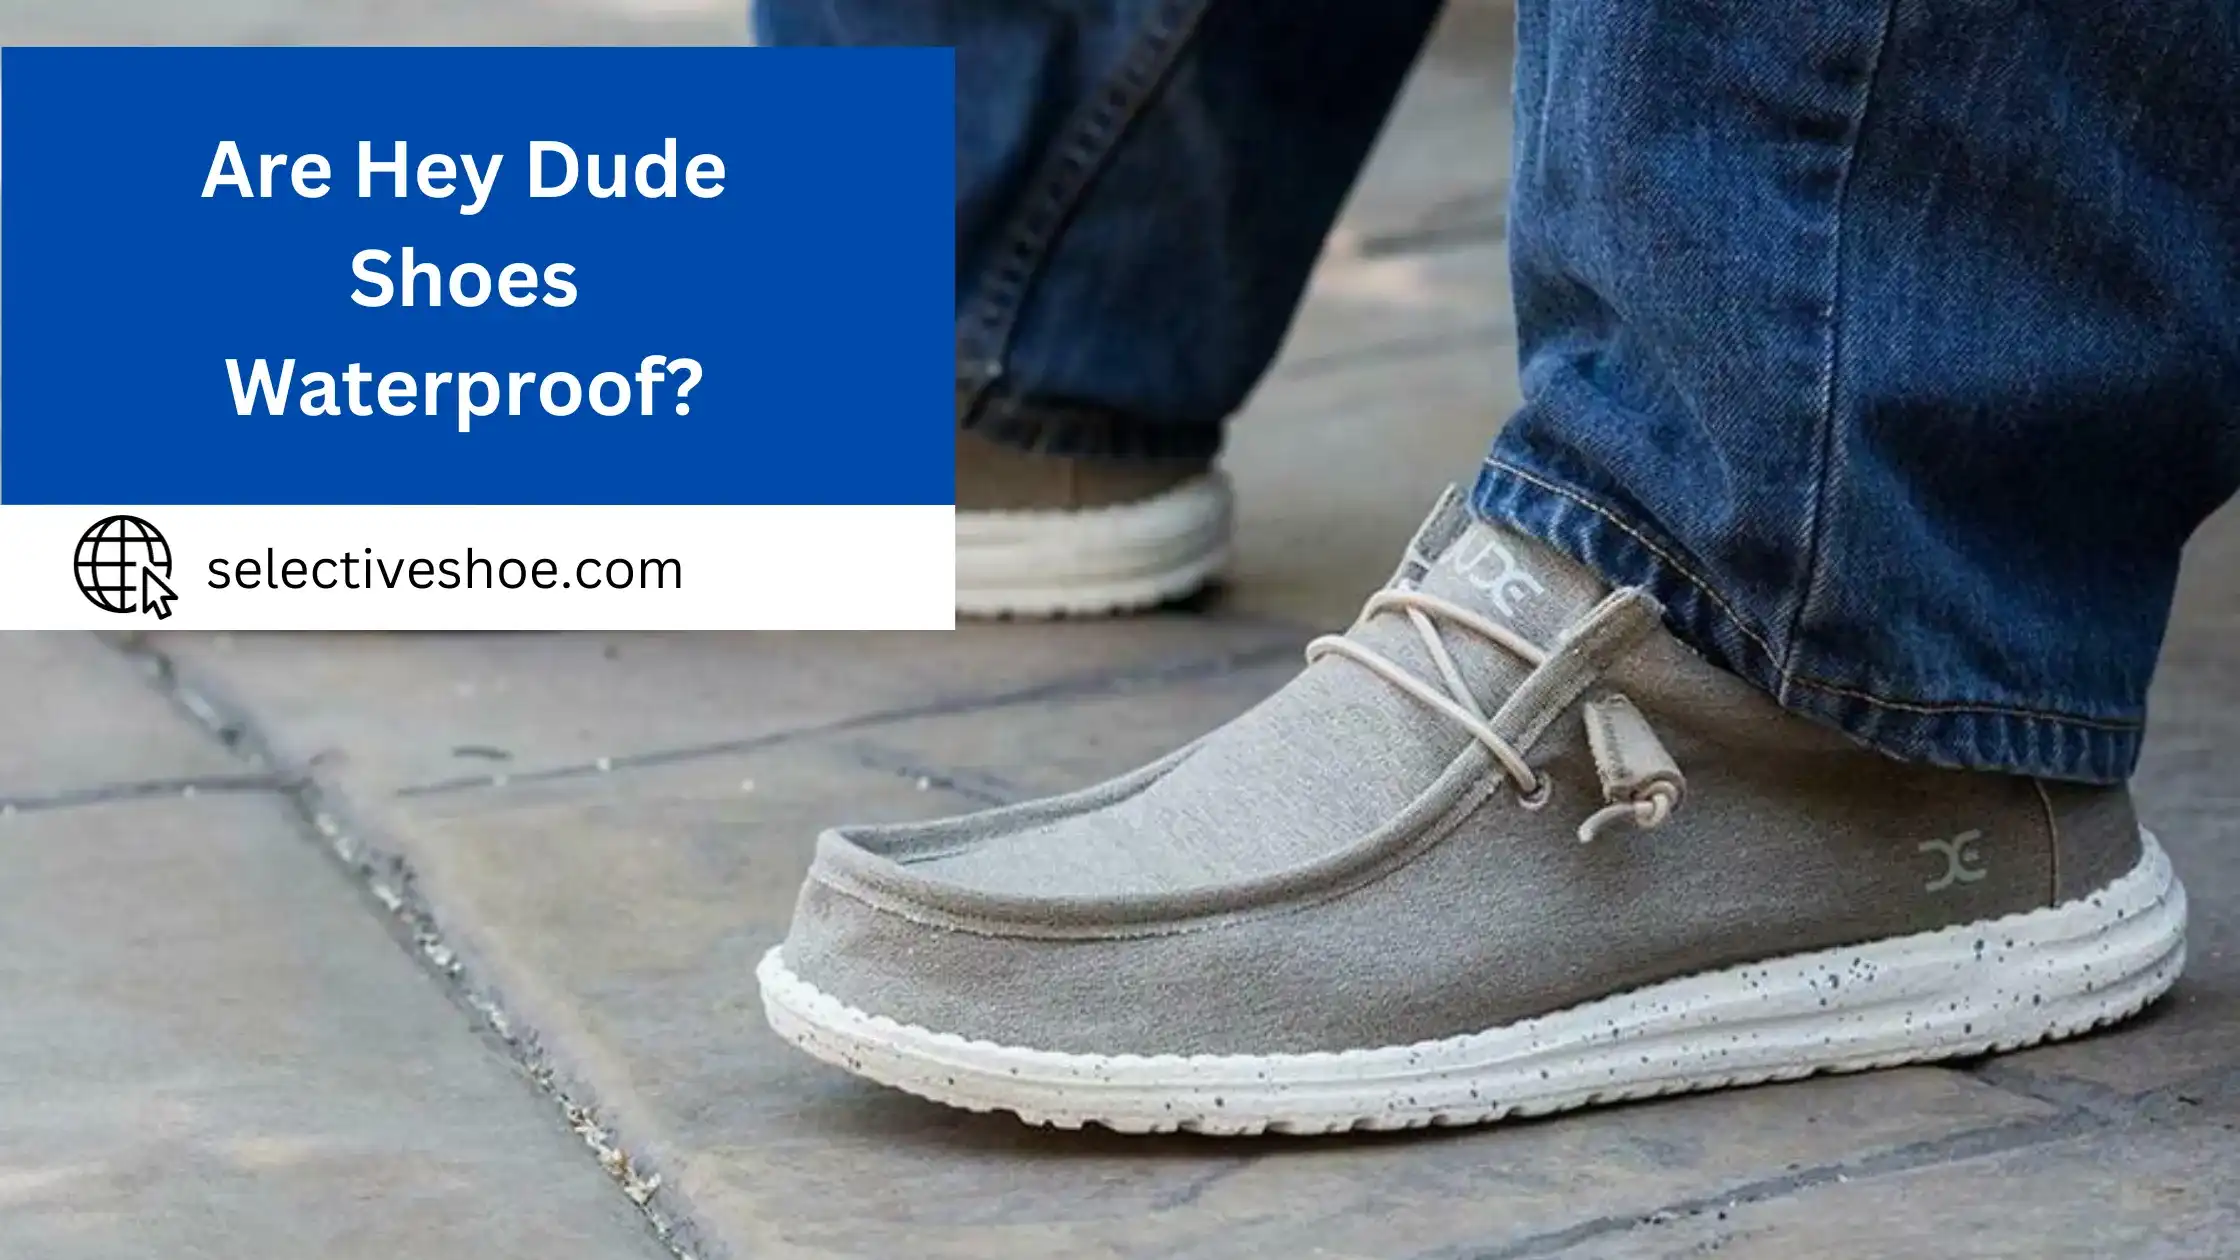 Are Hey Dude Shoes Waterproof? Detailed Information